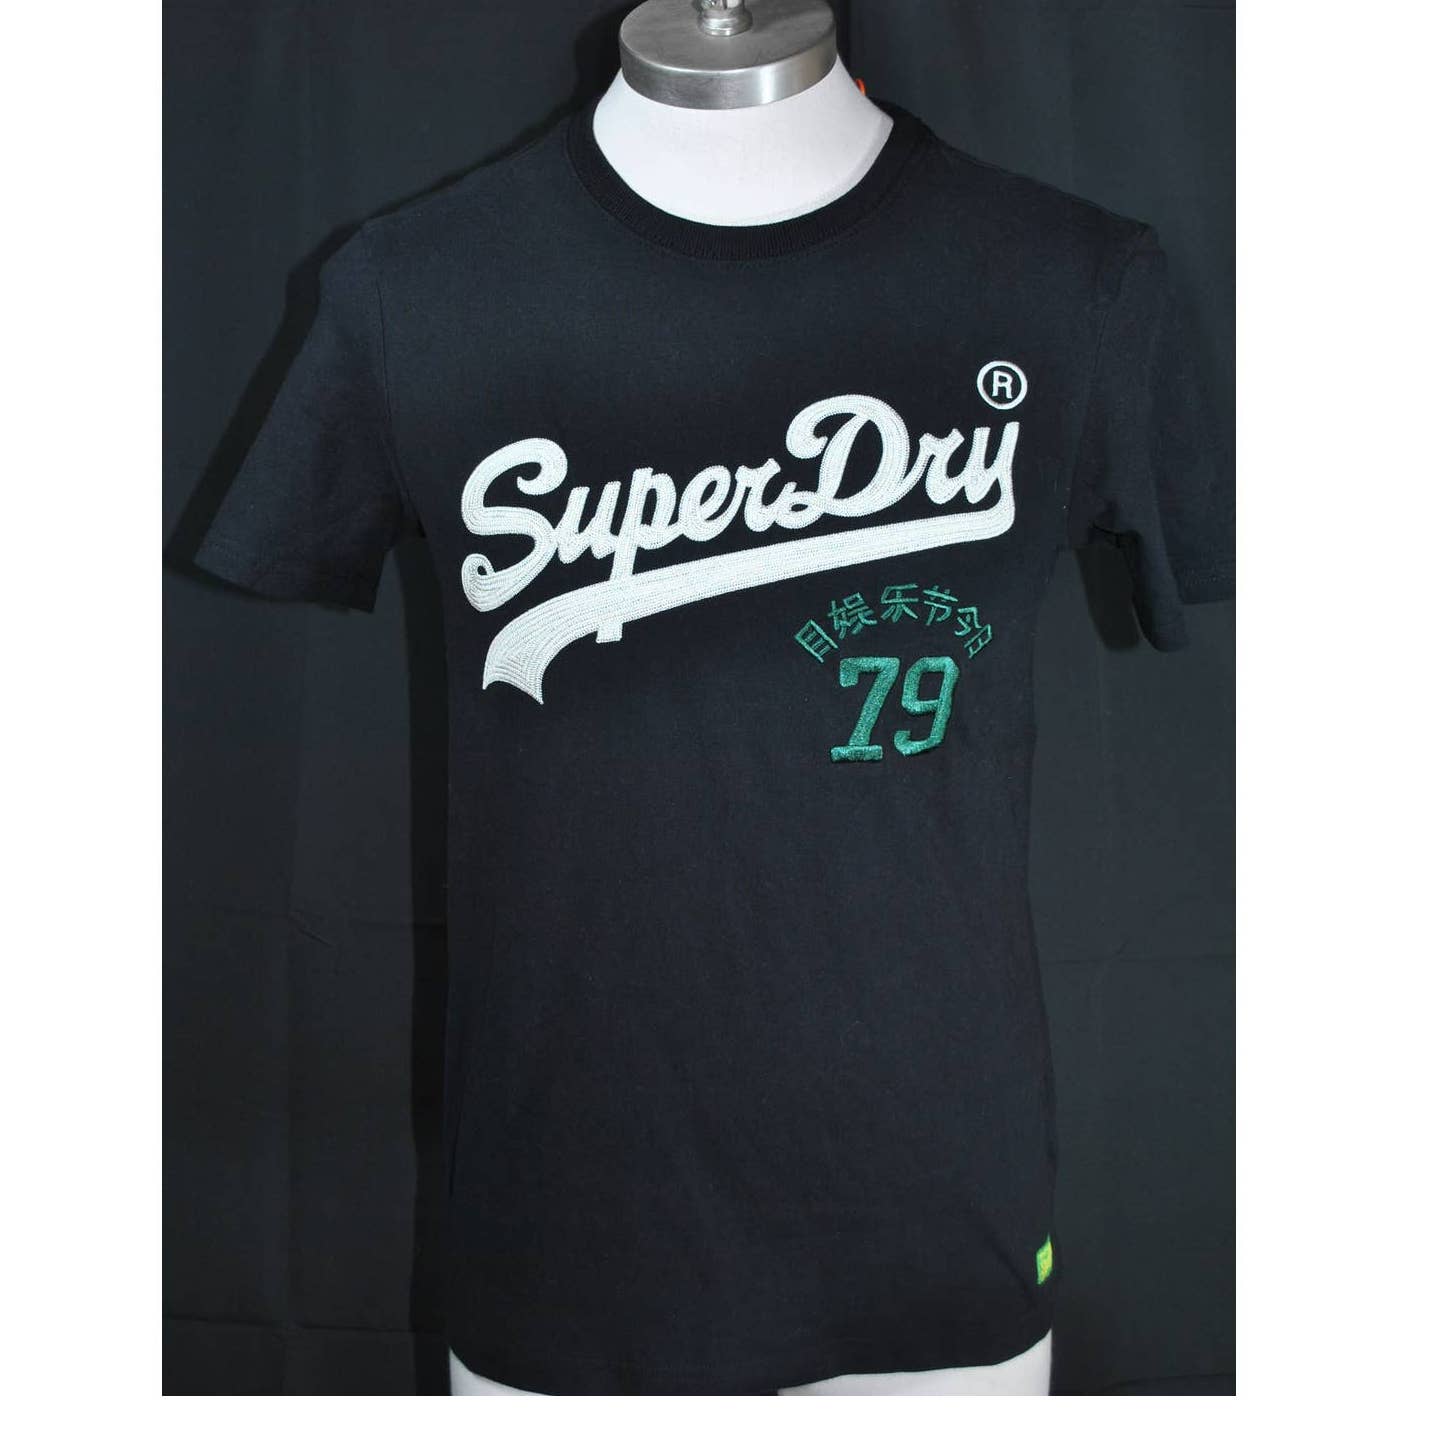 NWT Super Dry Vintage Jersey Style T-Shirt - S